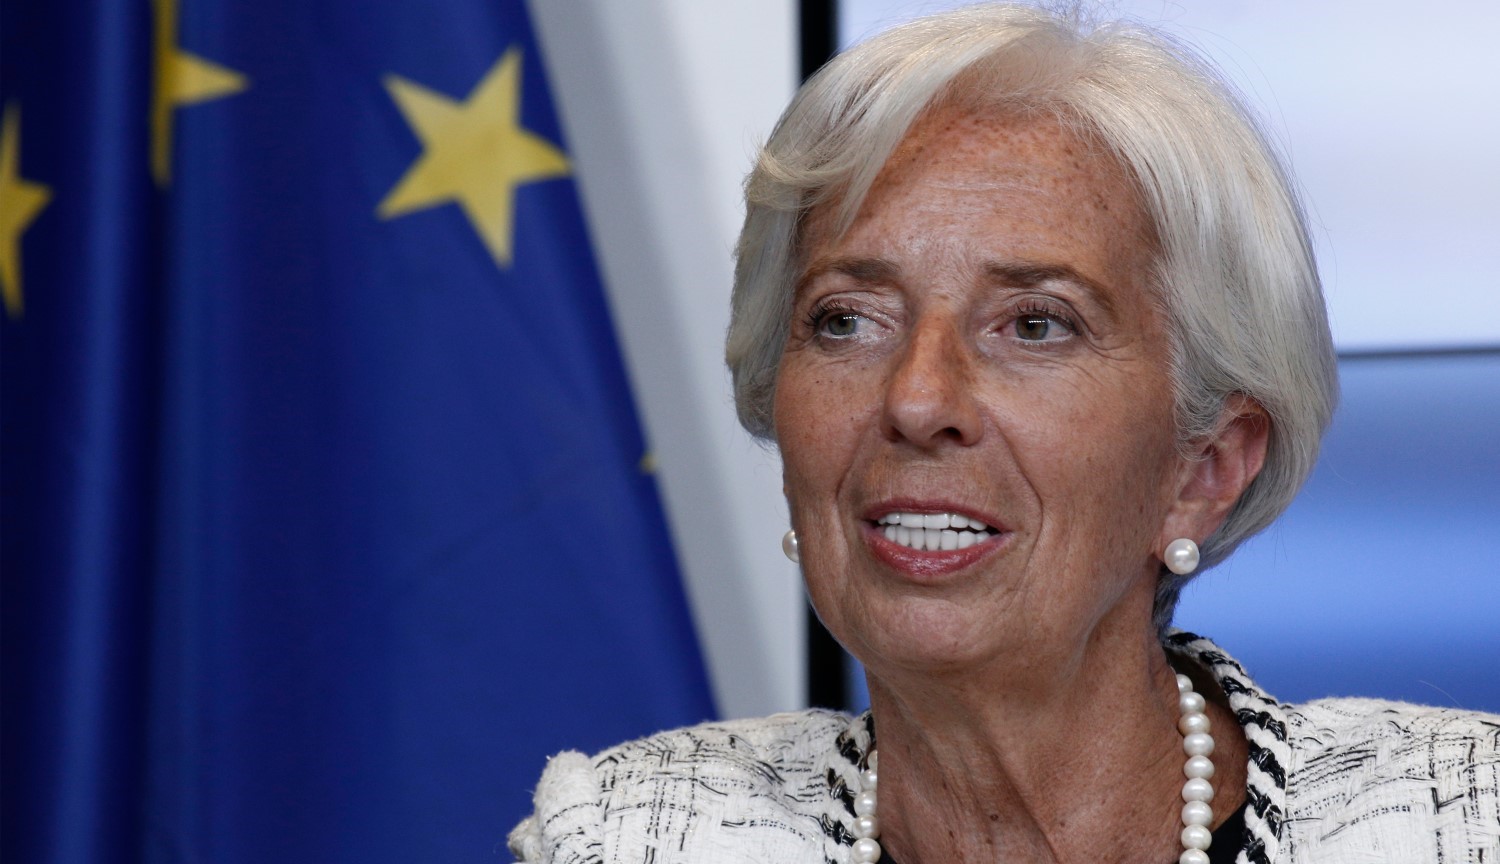 IMF Chief Lagarde Calls For ‘Exploration’ Of State-Backed Digital Currencies